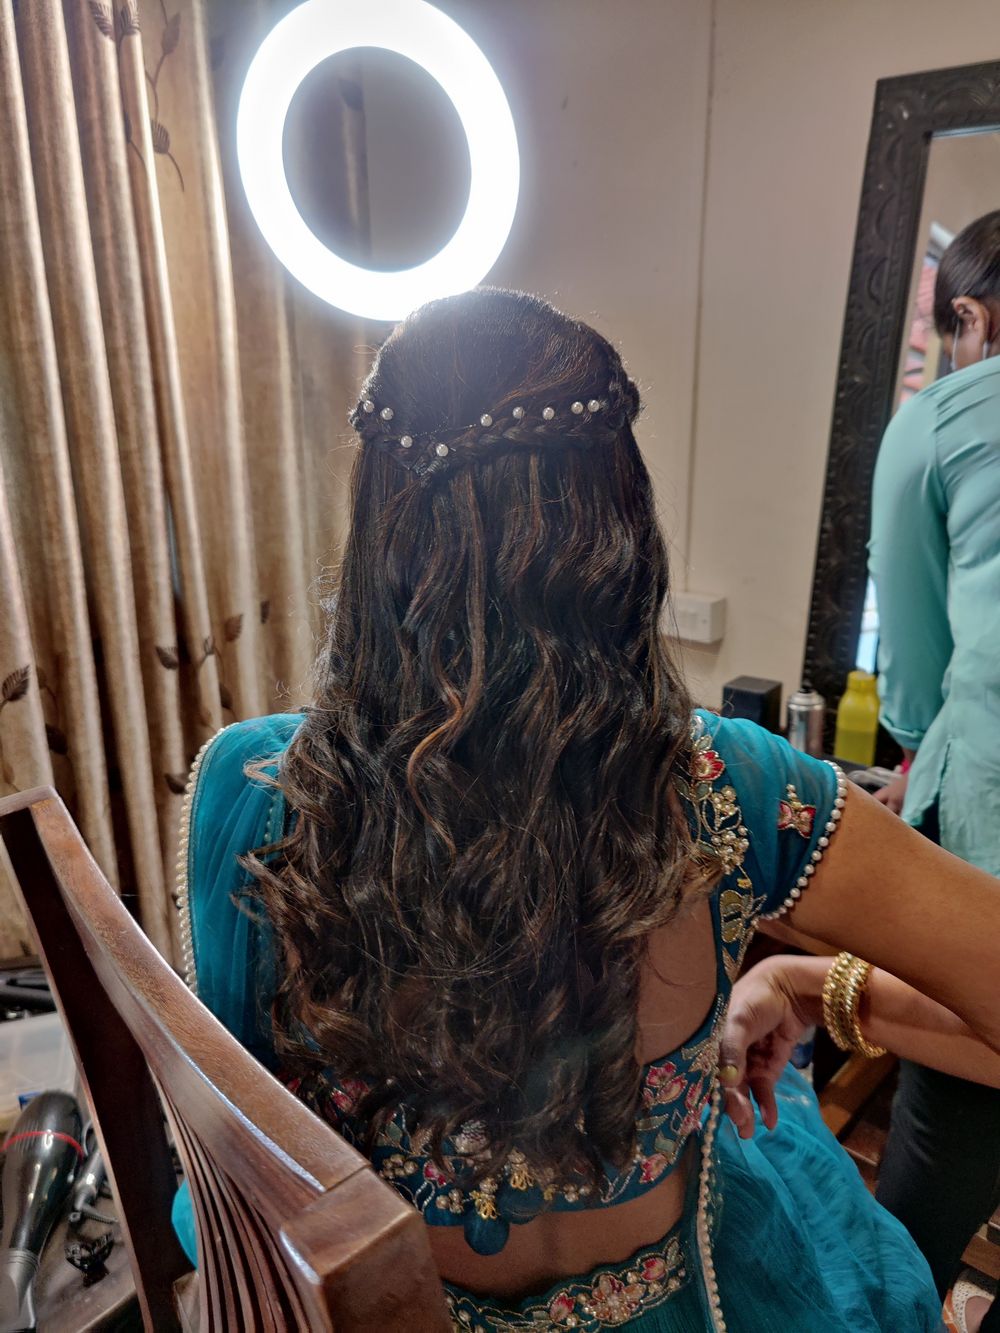 Photo From Hairstyle - By KritisBride